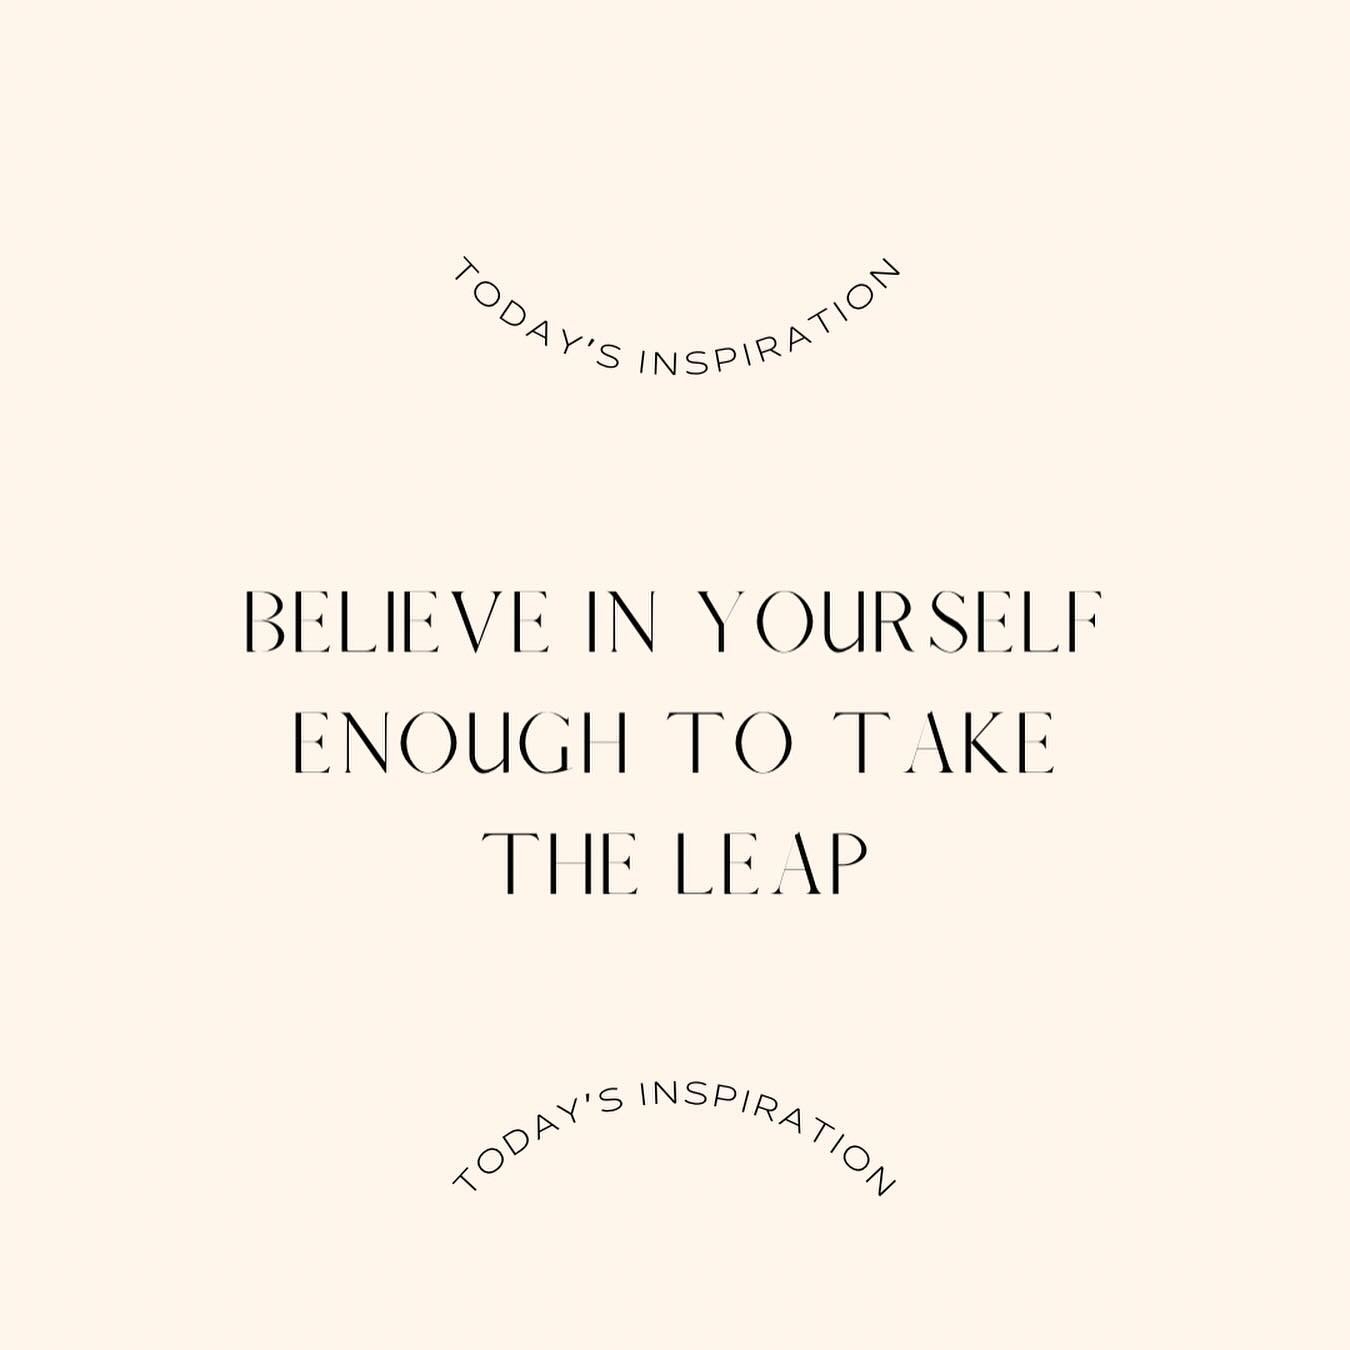 Loving yourself means believing in yourself. It means taking chances and knowing that if you fail, there were lessons learned and you&rsquo;re wiser because of it. Loving yourself means taking the leap because what if it works out? Please believe in 